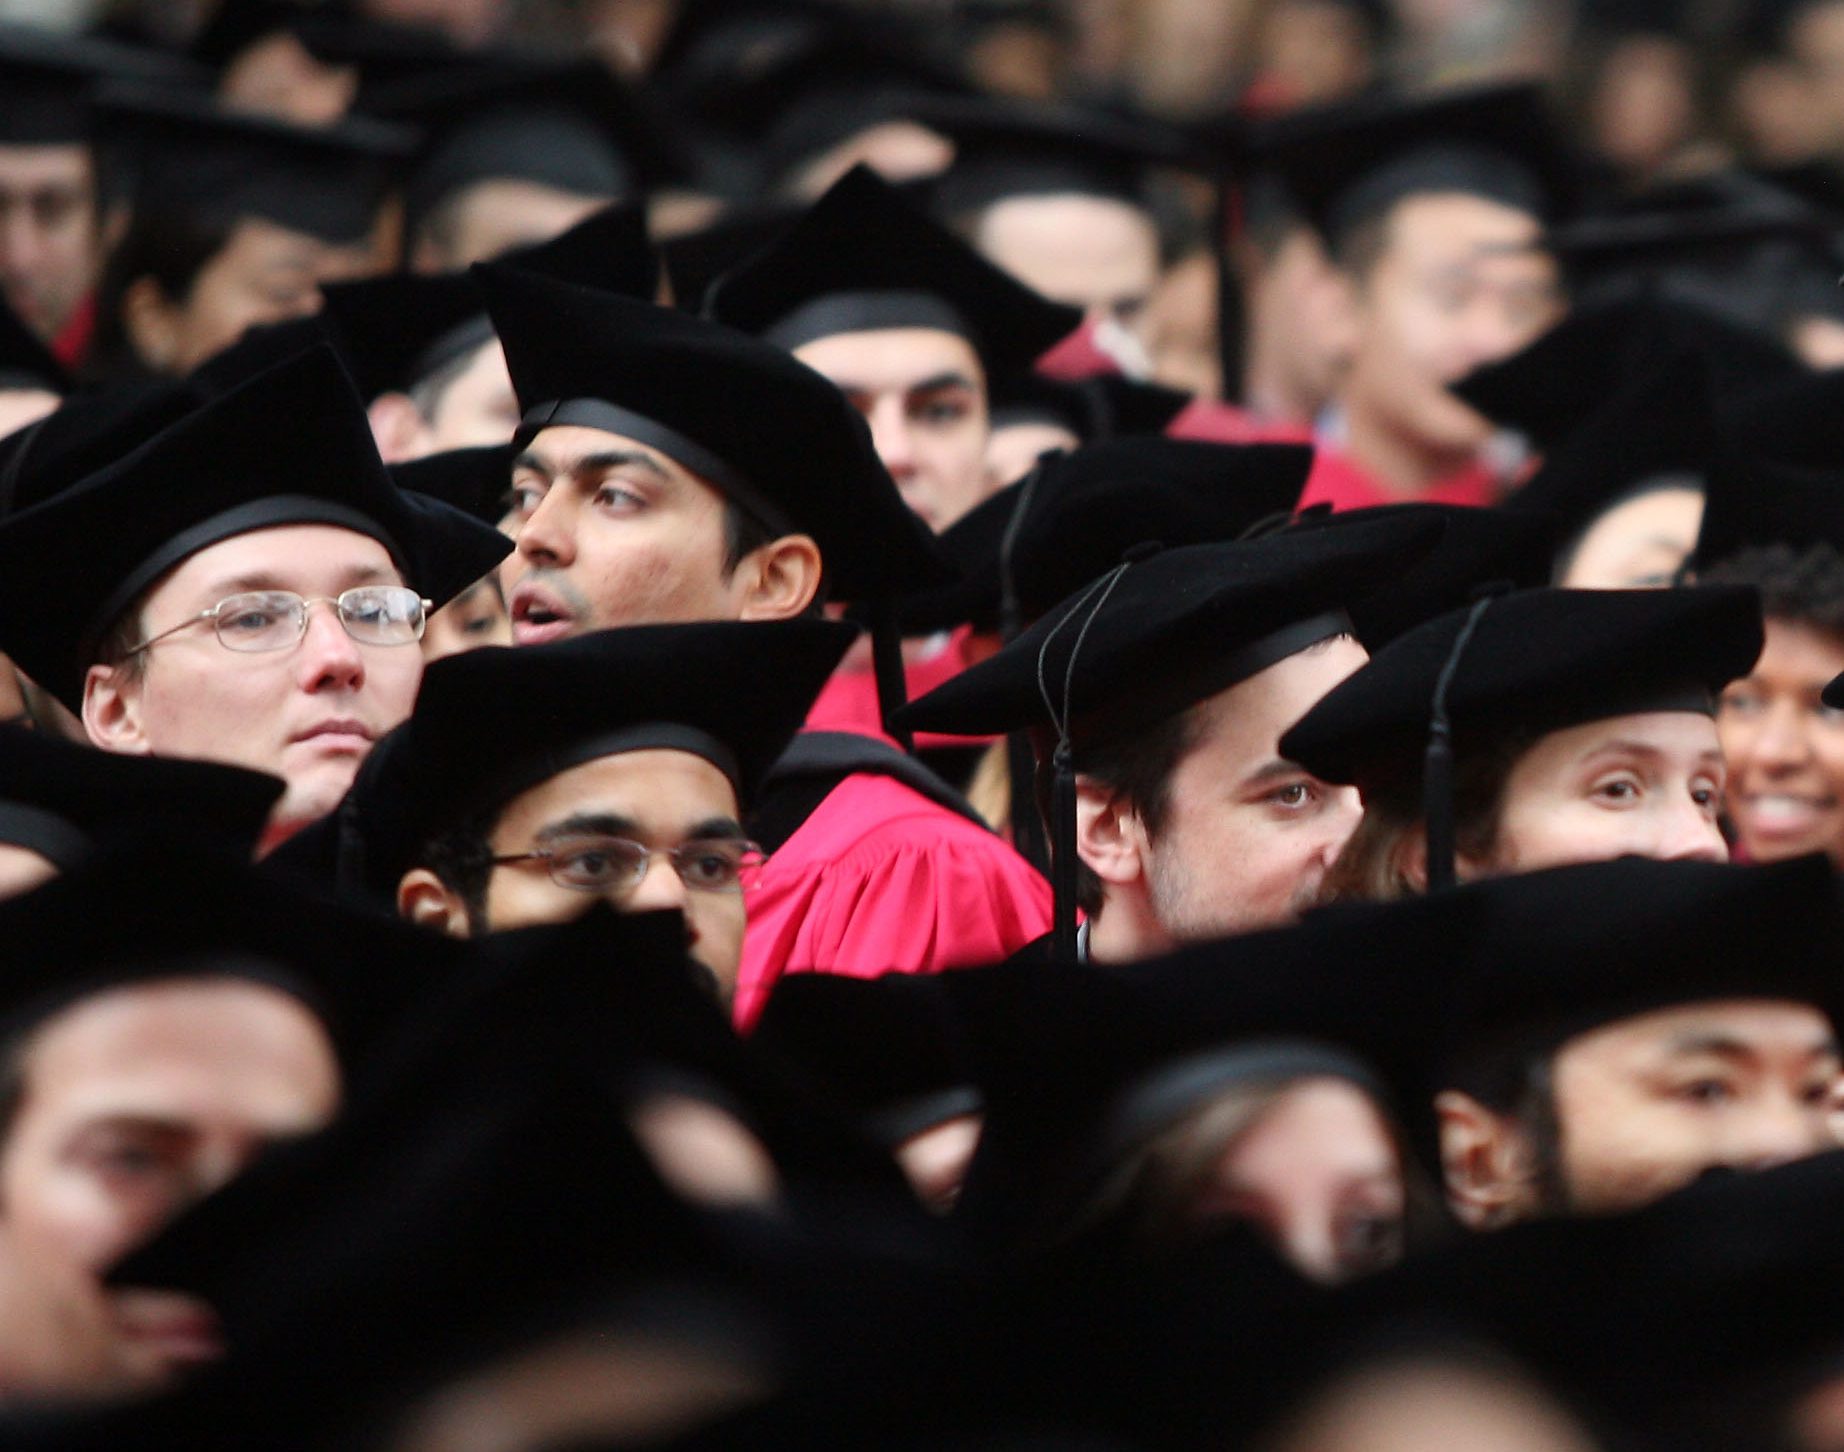 Students sitting during Harvard University's commencement ceremonies on June 5, 2008. (Robert Spencer/Getty Images)